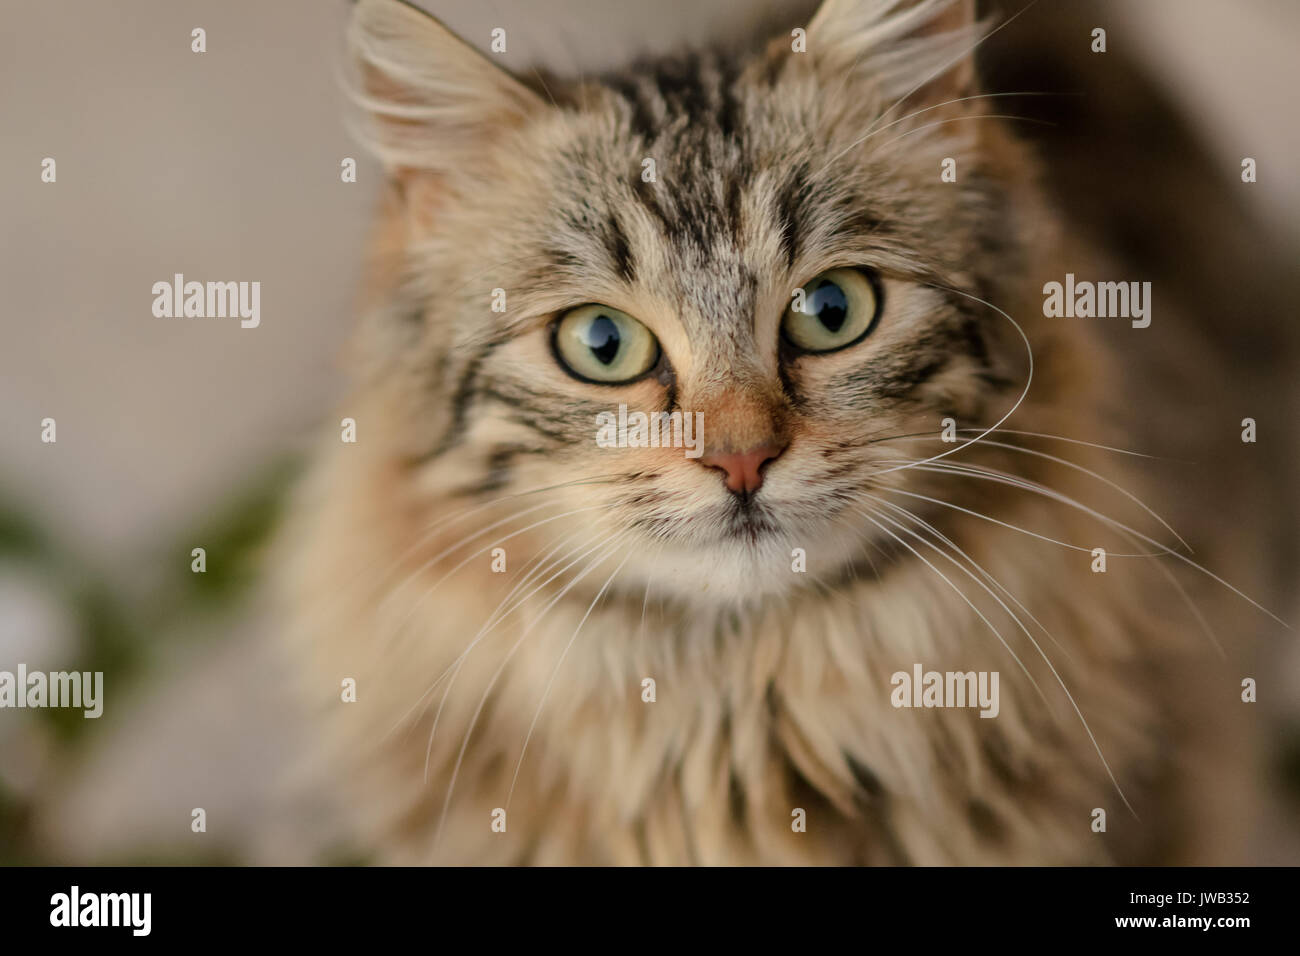 Lose up of the face of a striped brown and grey cat with blurred background. Landscape format. Stock Photo